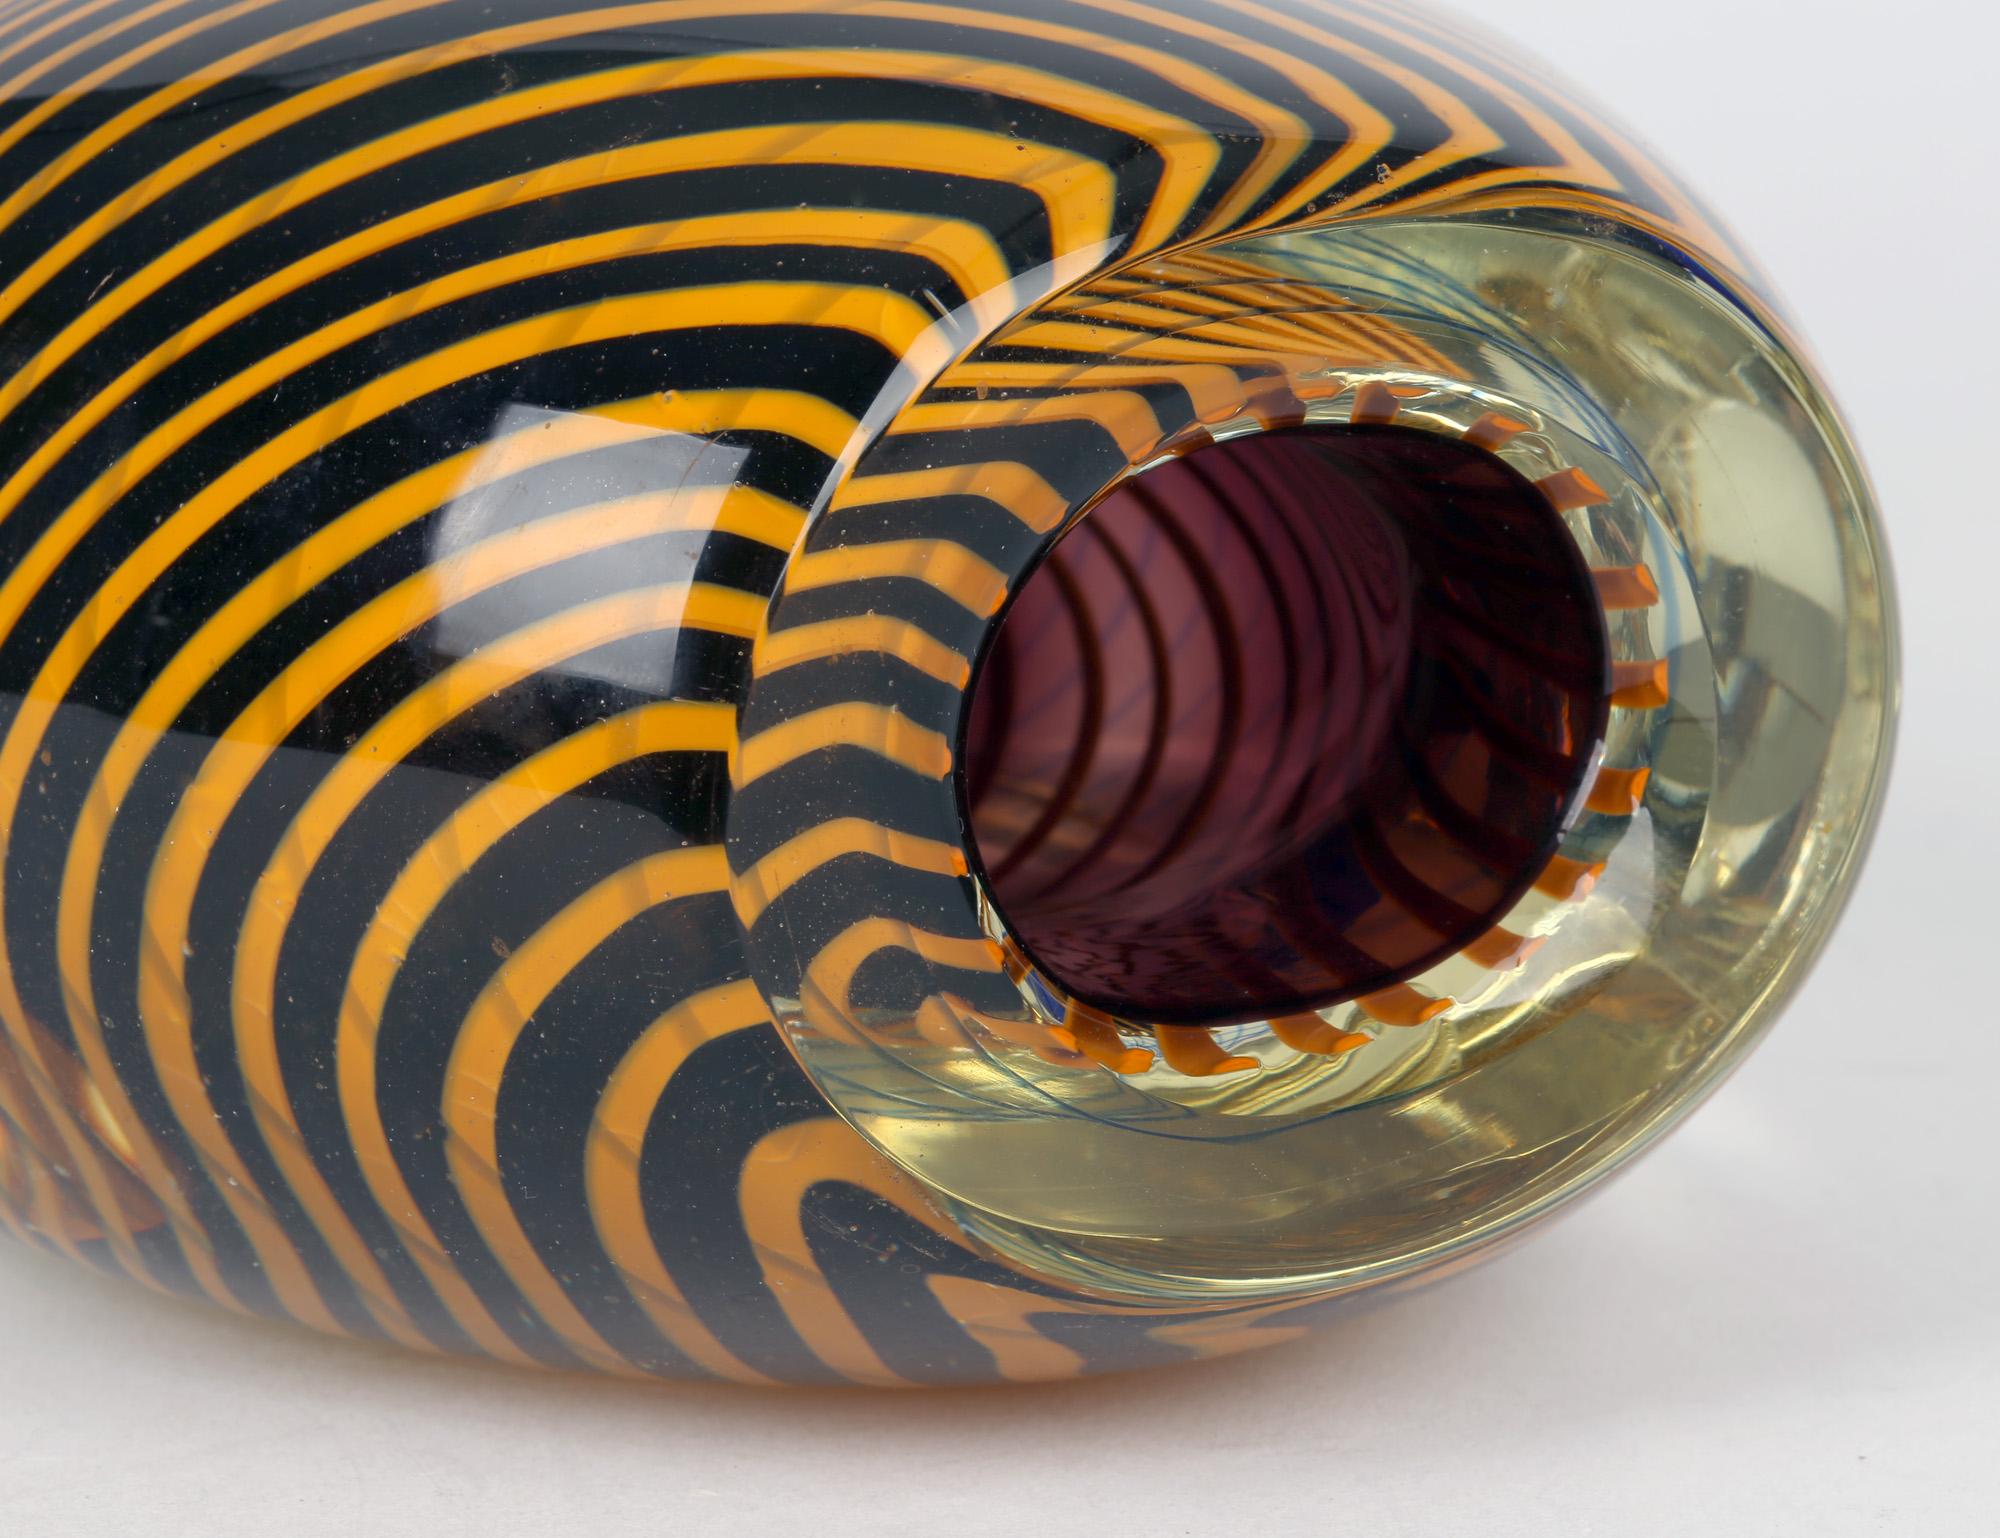 A stunning Czech/Bohemian art glass sculptural vase with encased swirl patterning attributed to Stanislav Liensky (1921-2002) for Beranek Skrdlovice Glassworks and dating from the 1970's. This heavily made blown glass vase stands mounted on square